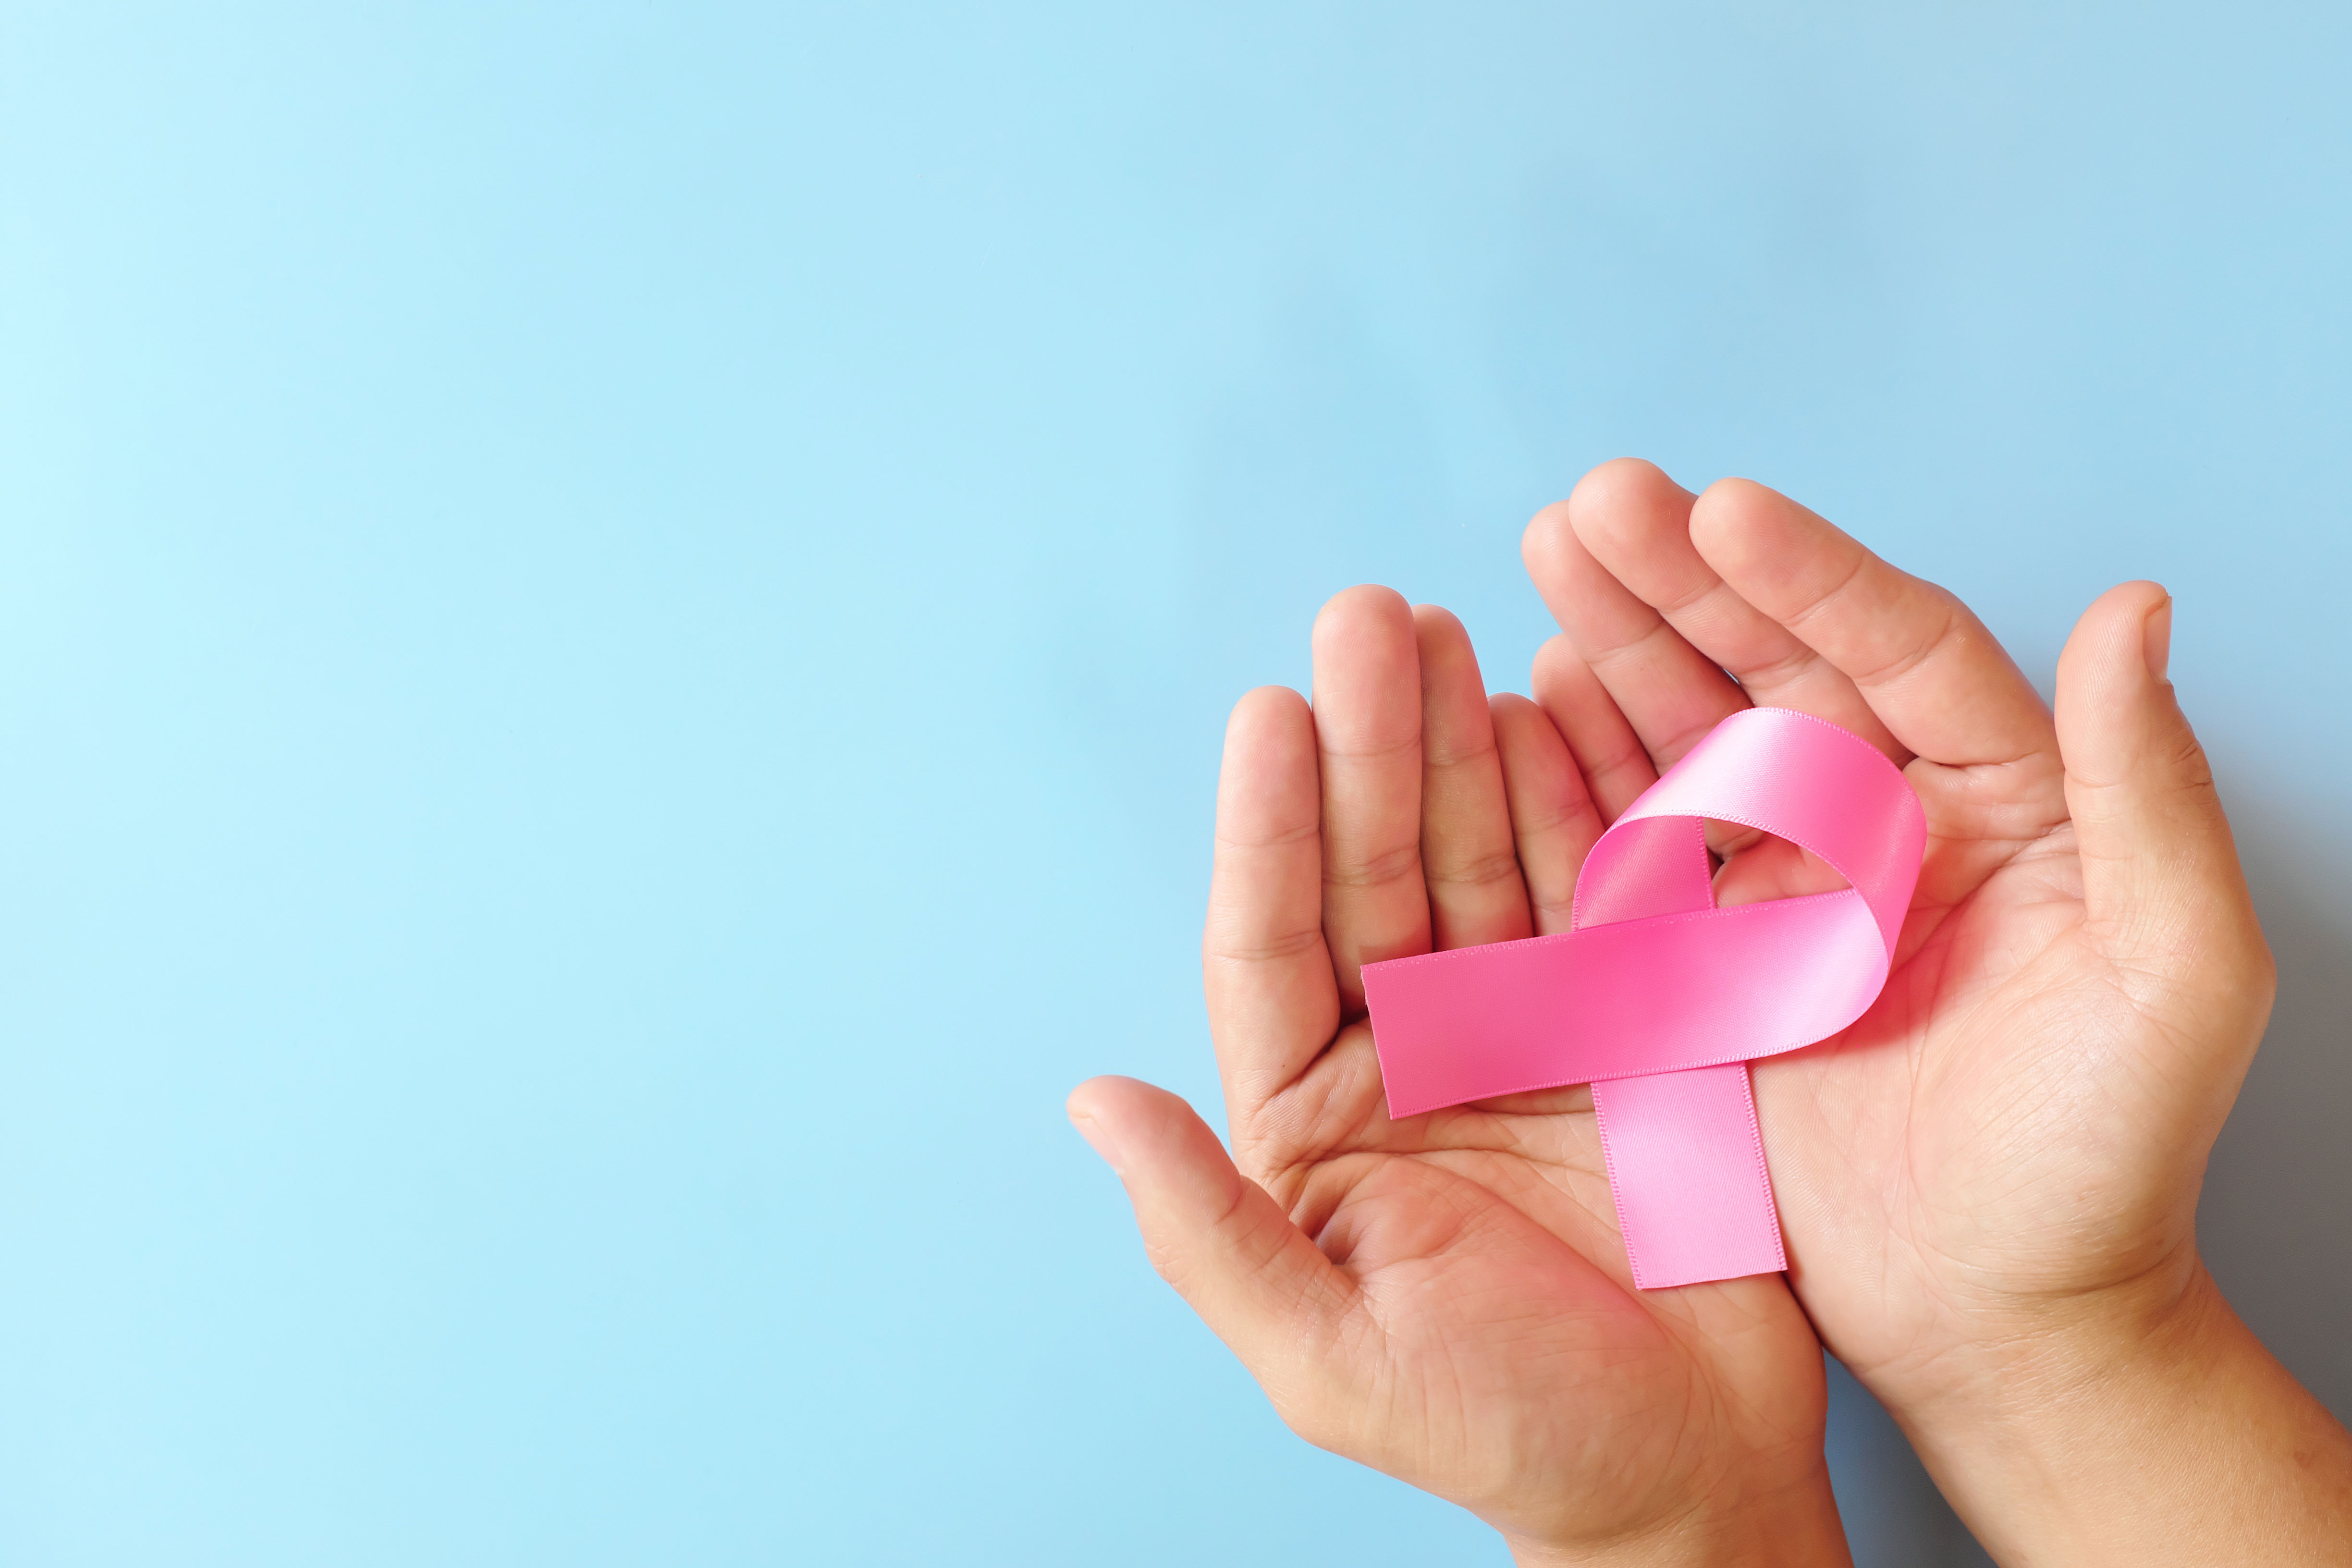 Hands holding a pink ribbon